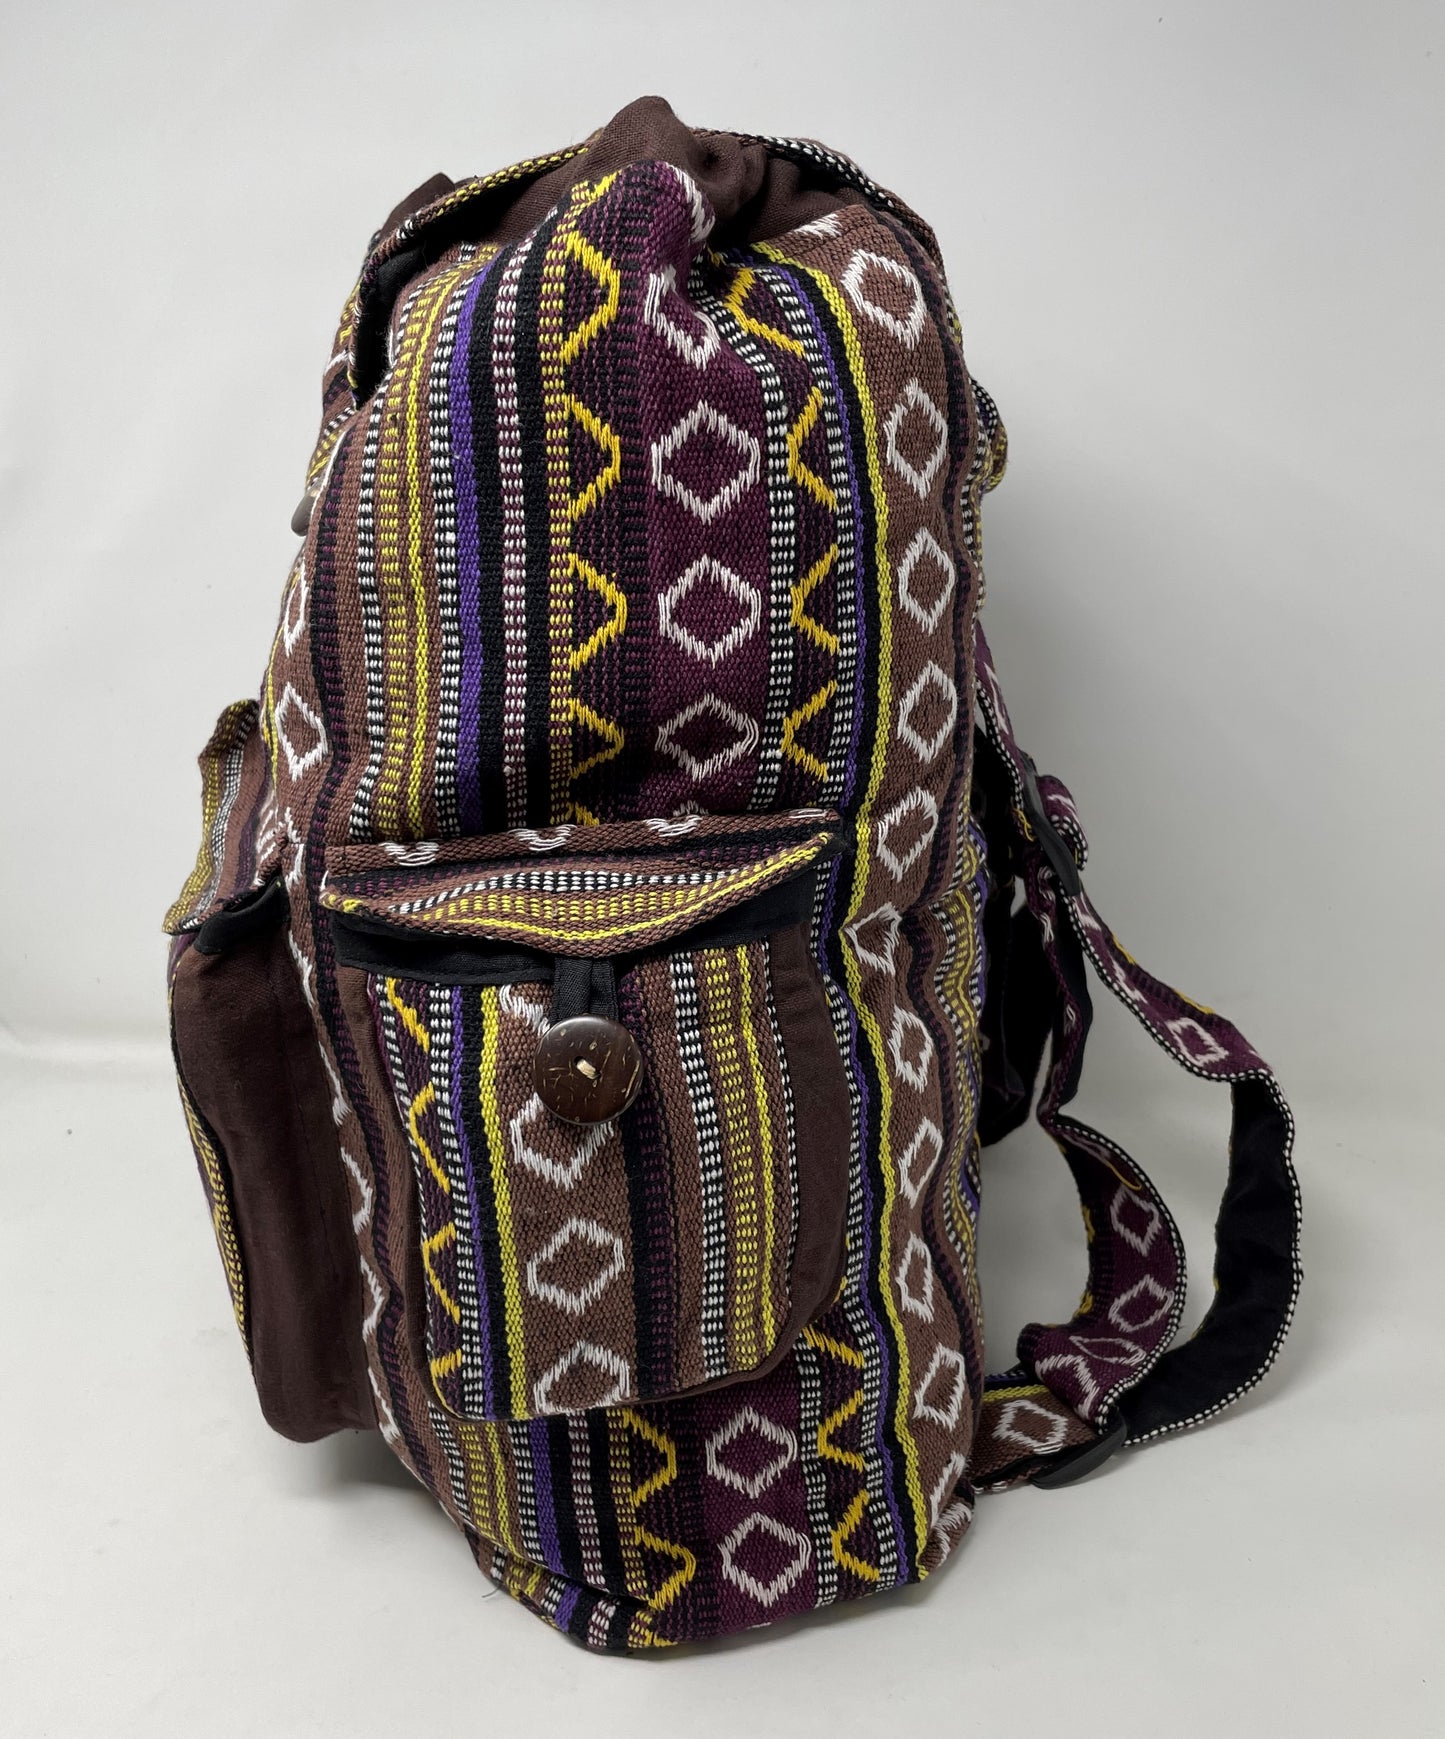 Gehry Woven Fabric Back Pack Multi Pockets - Beautiful Colorful Design